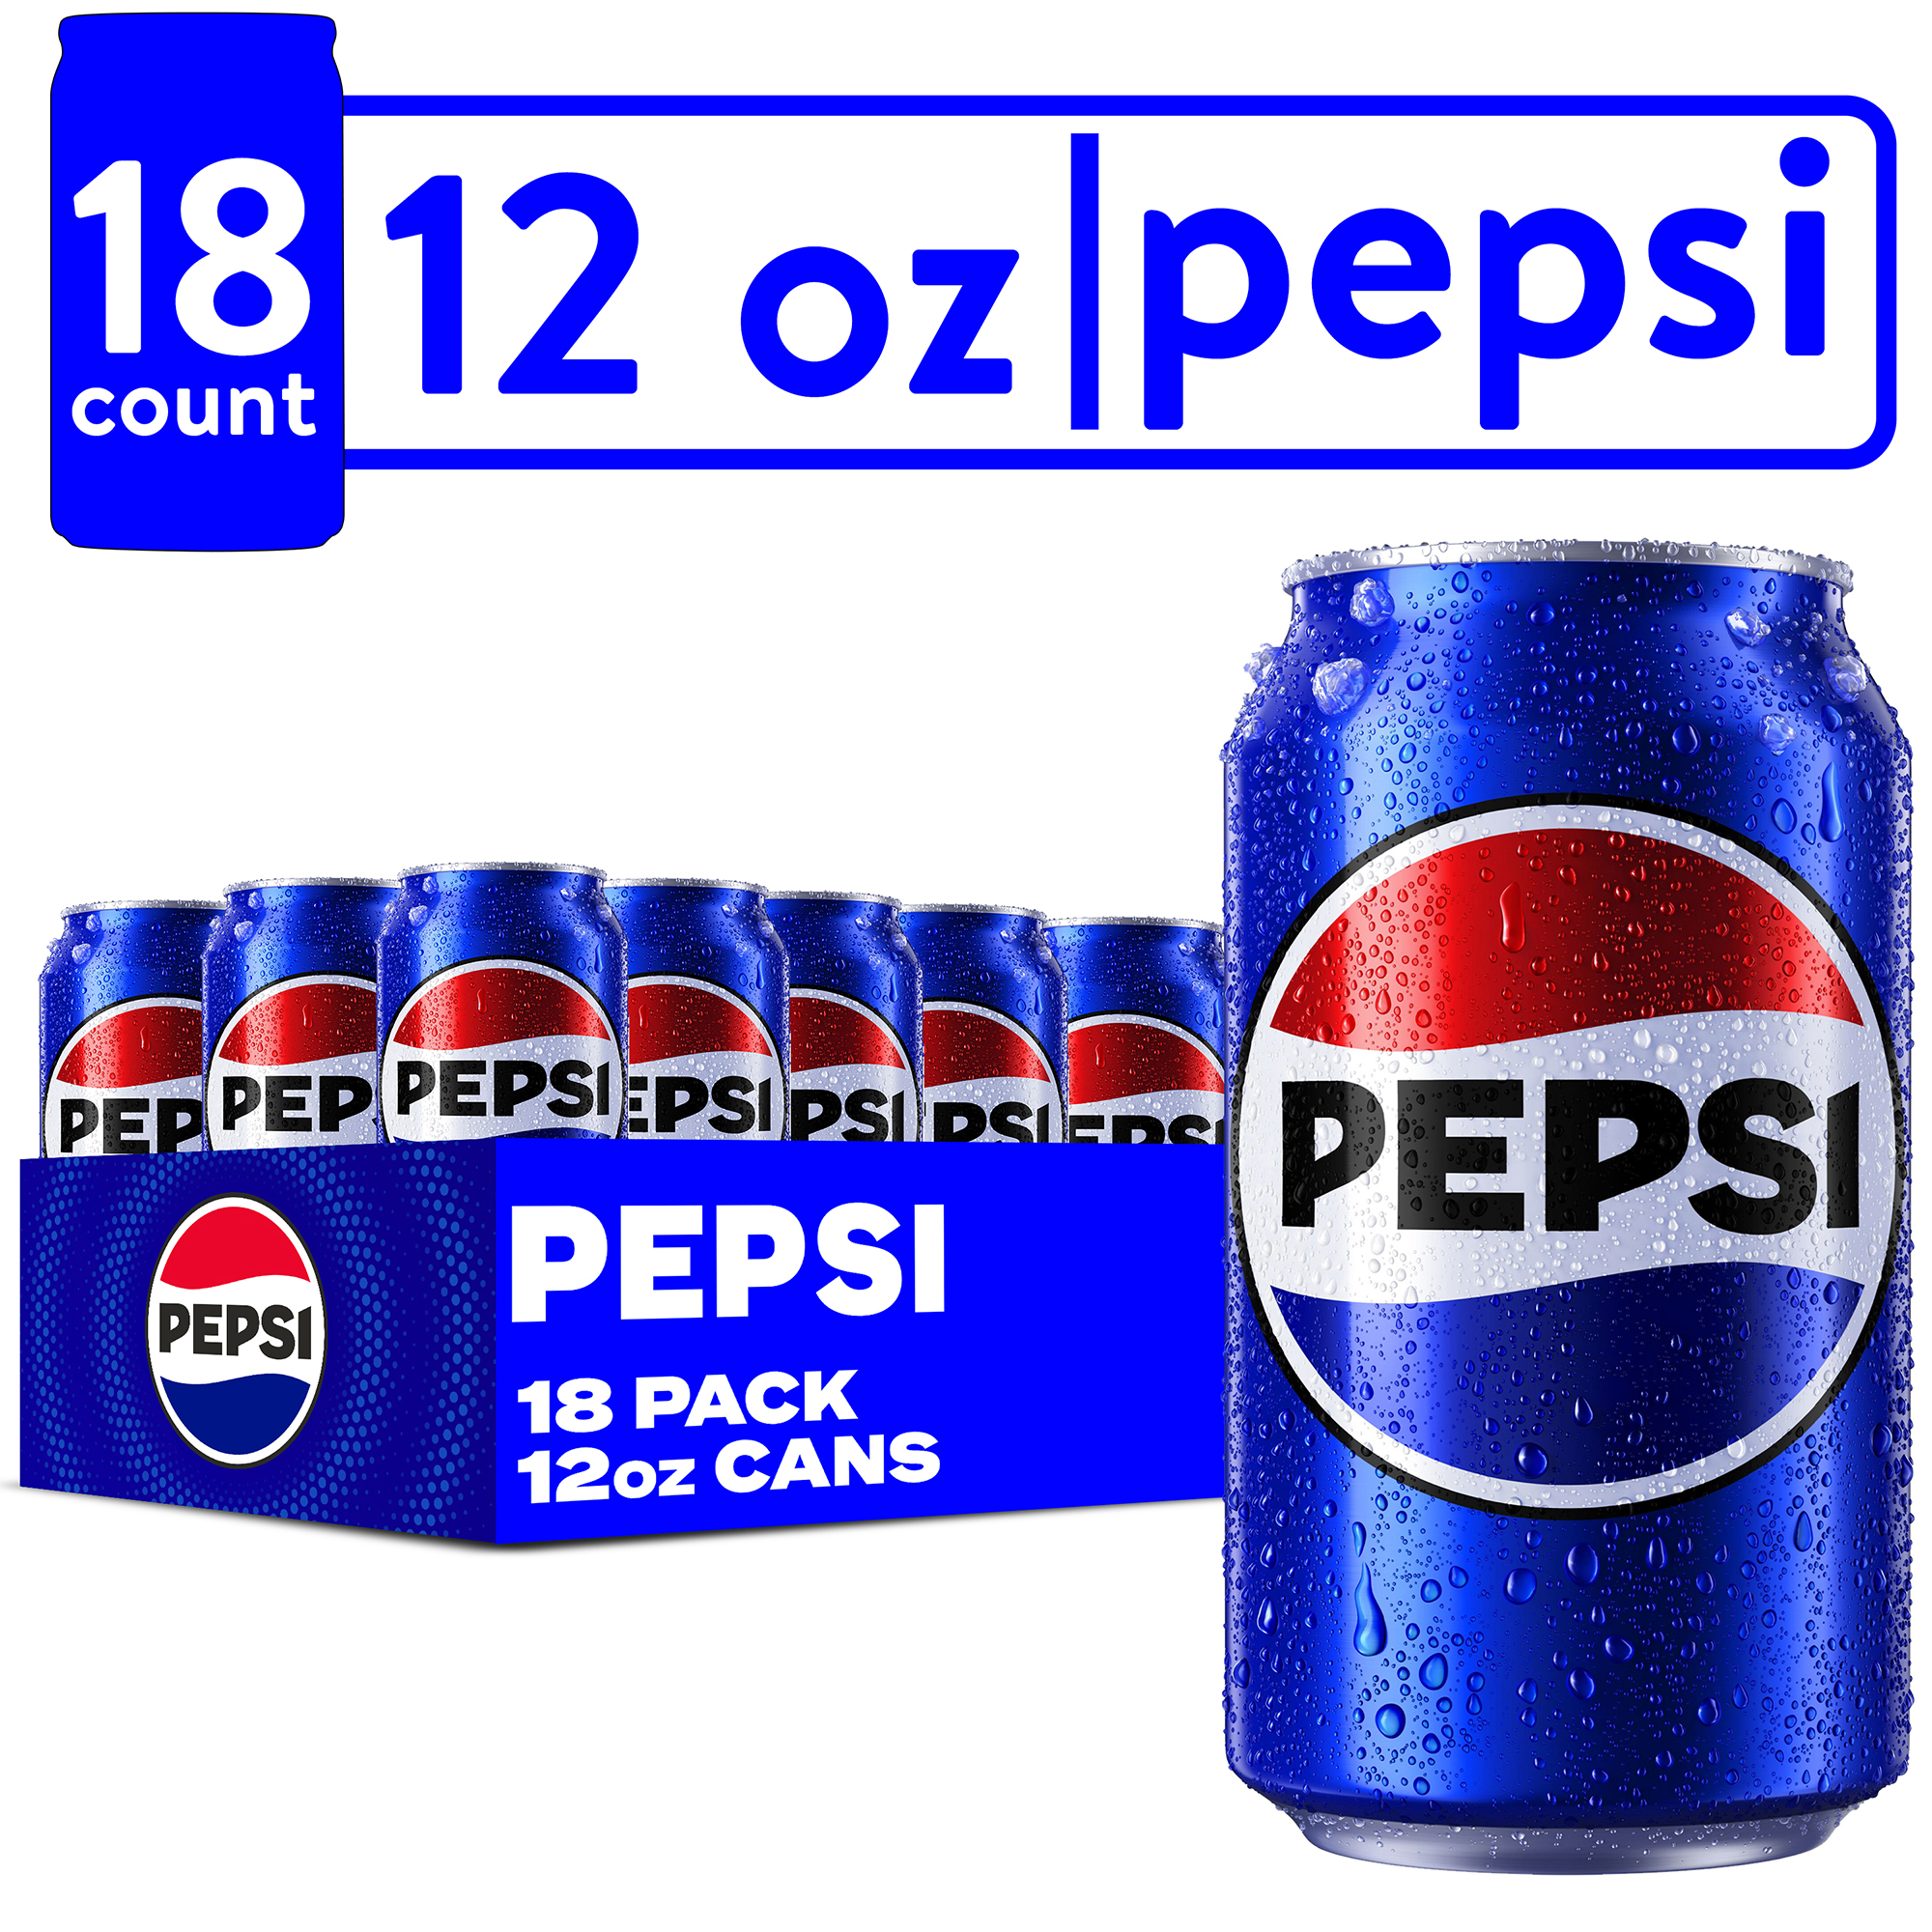 Pepsi Cola Soda Pop, 12 fl oz Cans, 18 Pack Cans - image 1 of 8